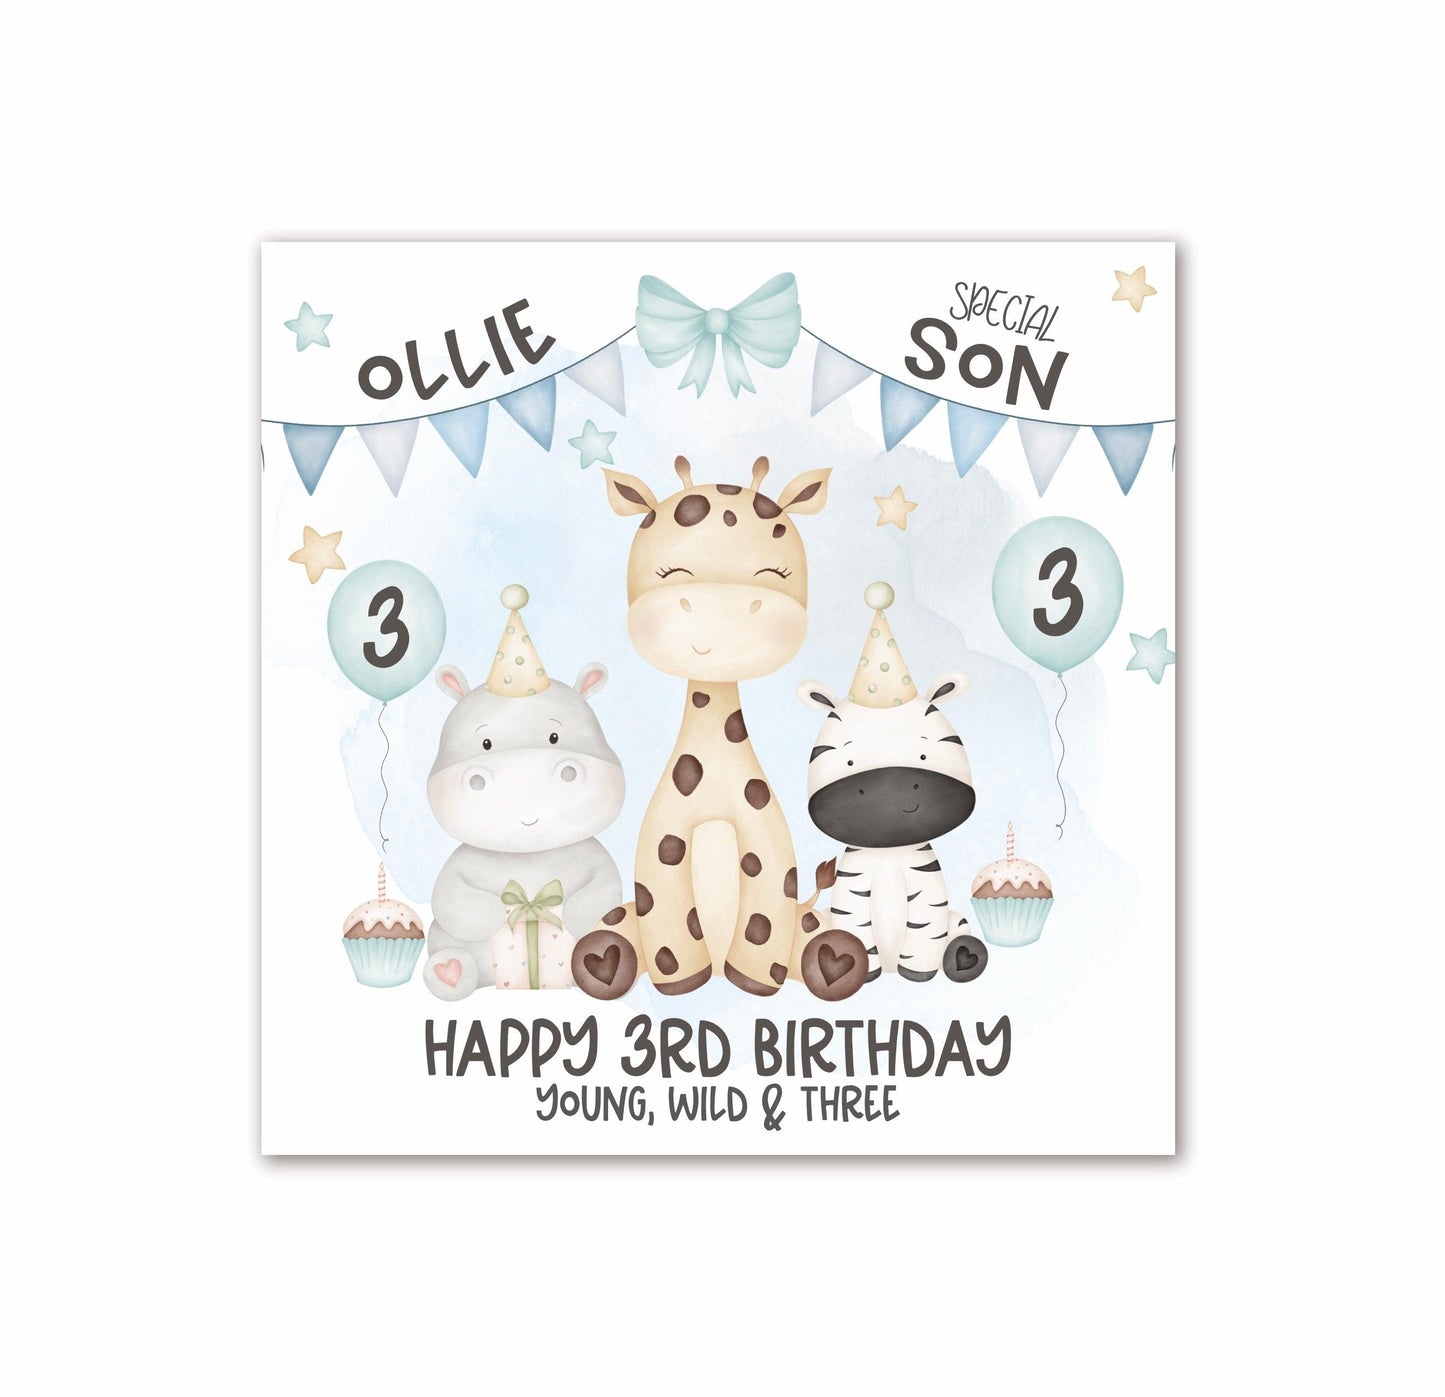 Safari Animals 3rd Birthday Card in BLUE, Personalised with a Name, Special SON, Happy 3rd Birthday Card, YOUNG, WILD & THREE, Giraffe, Rhino & Zebra [Oliver Rose Designs]